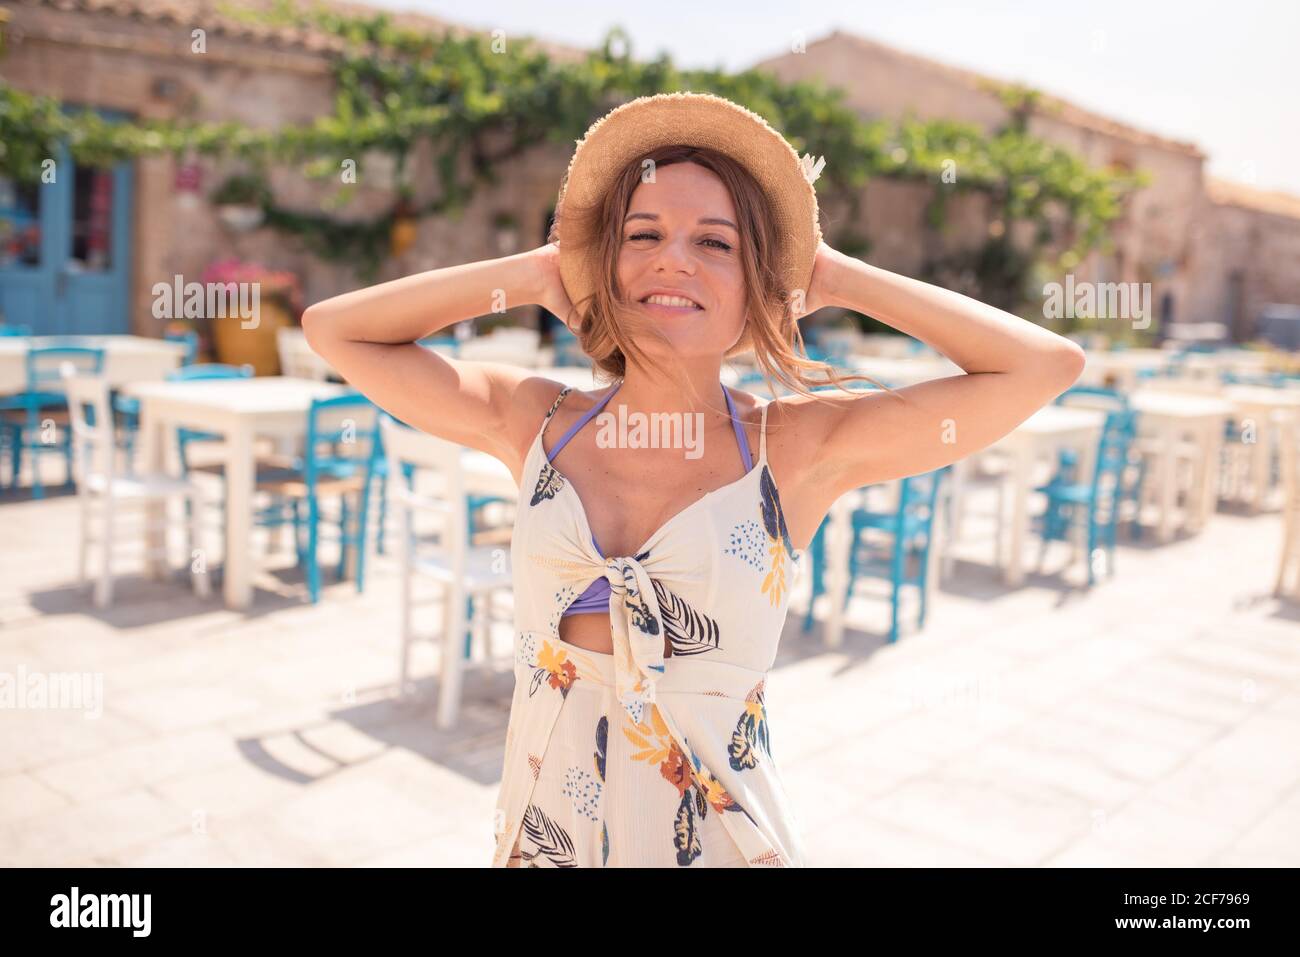 Alluring adult female in straw hat wearing light dress looking at camera while standing alone on cafe terrace against blue and white furniture in sunlight Stock Photo